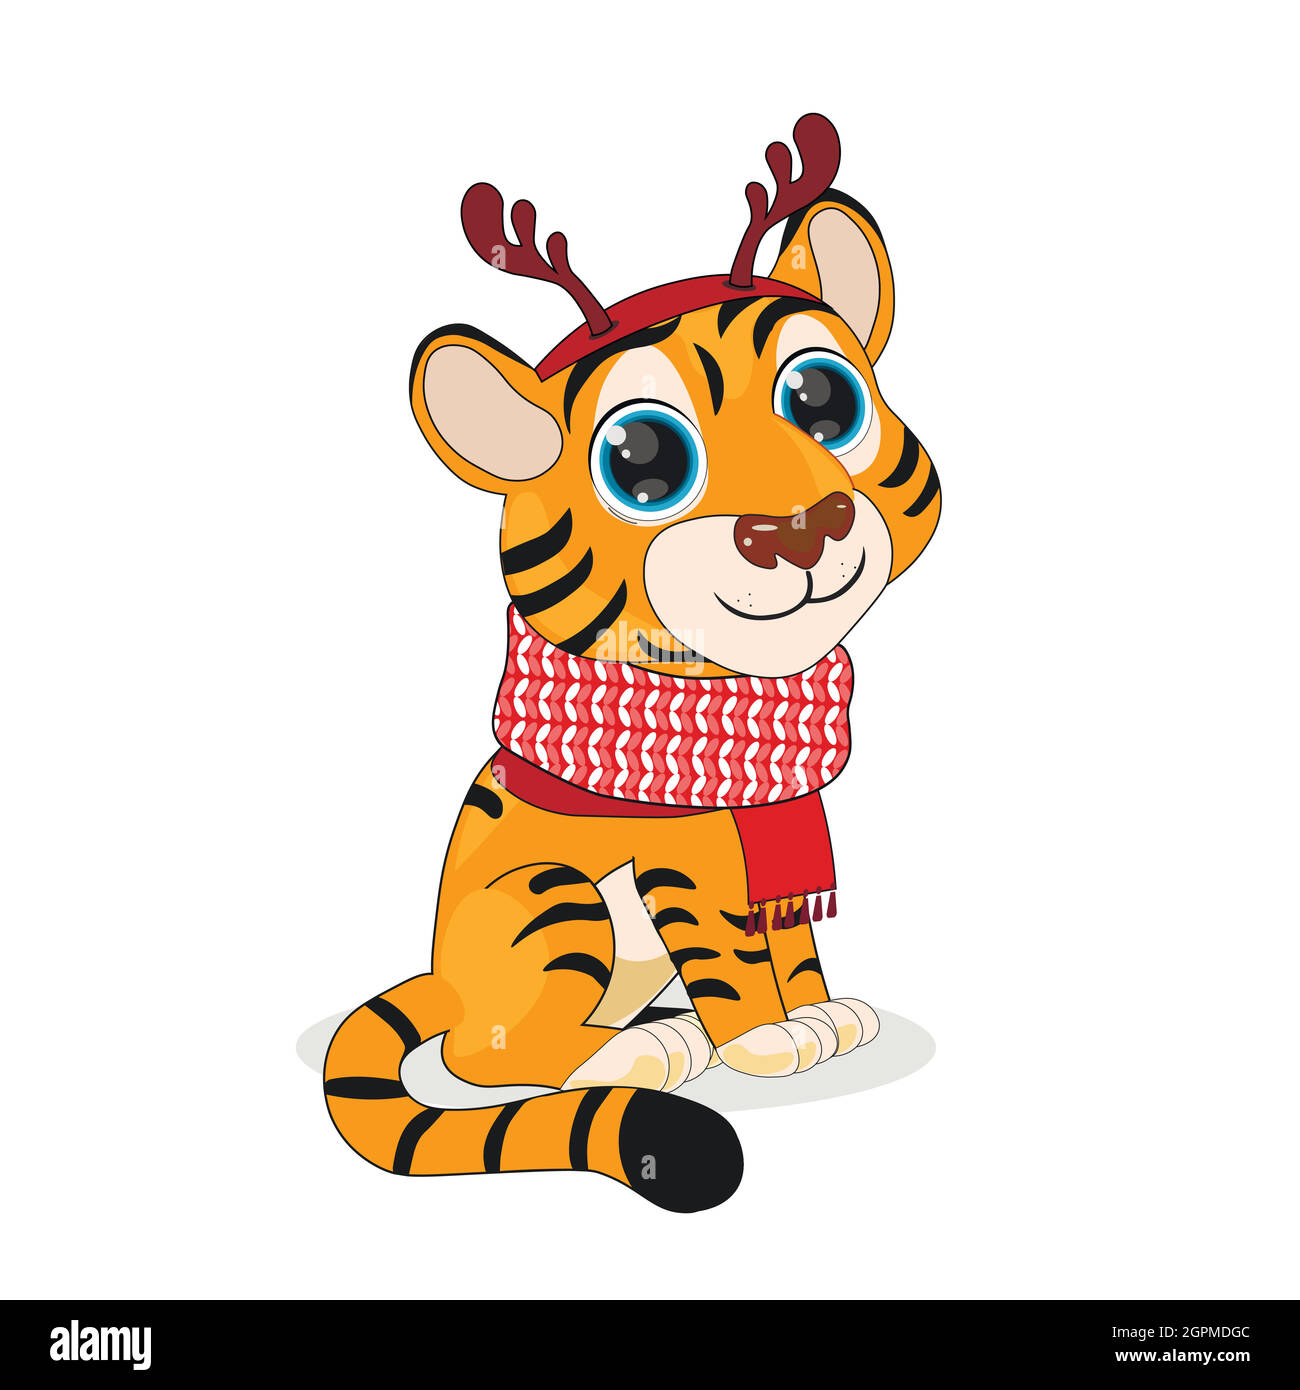 Cute cartoon tiger in winter clothes vector illustration. Perfect for cards, party invitations, posters, stickers, clothing. Christmas concept Stock Vector